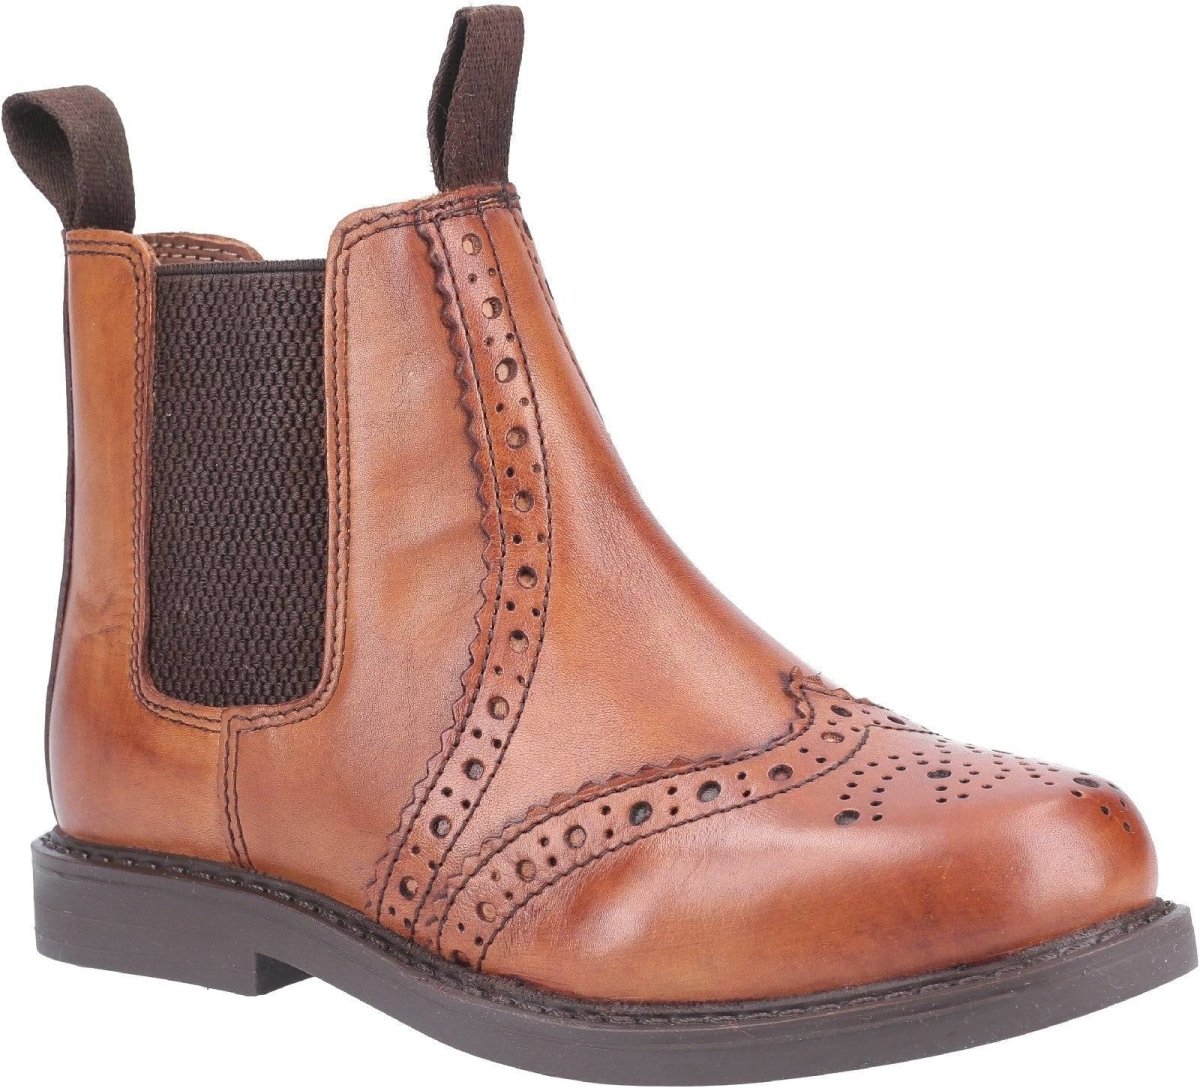 Cotswold Nympsfield Kids Brogue Chelsea Boots - Shoe Store Direct